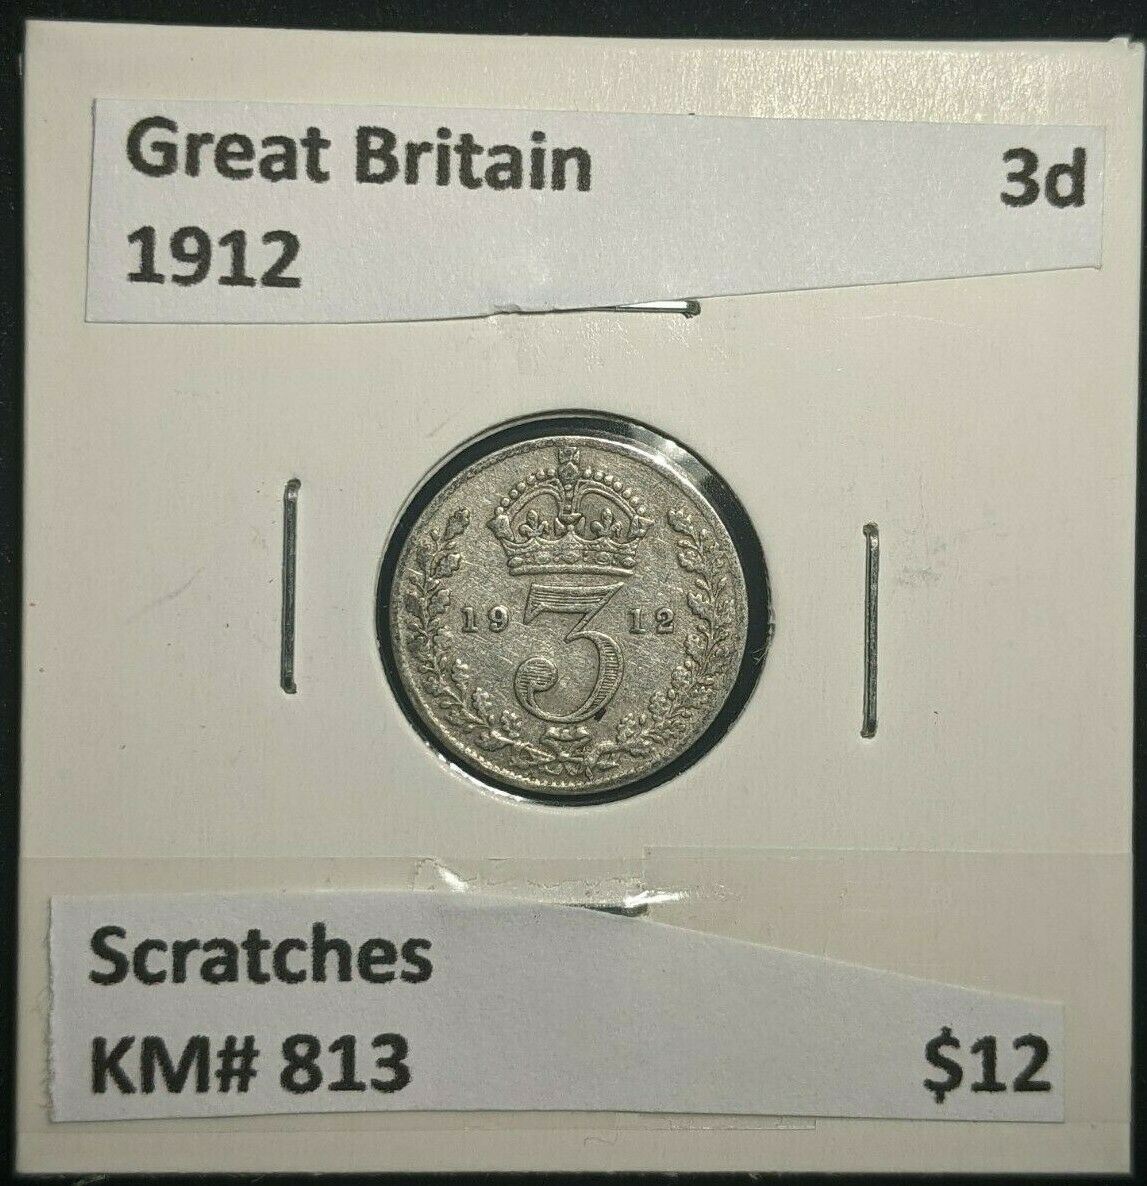 Great Britain 1912 3d Threepence KM# 813 Scratches #164 #16B